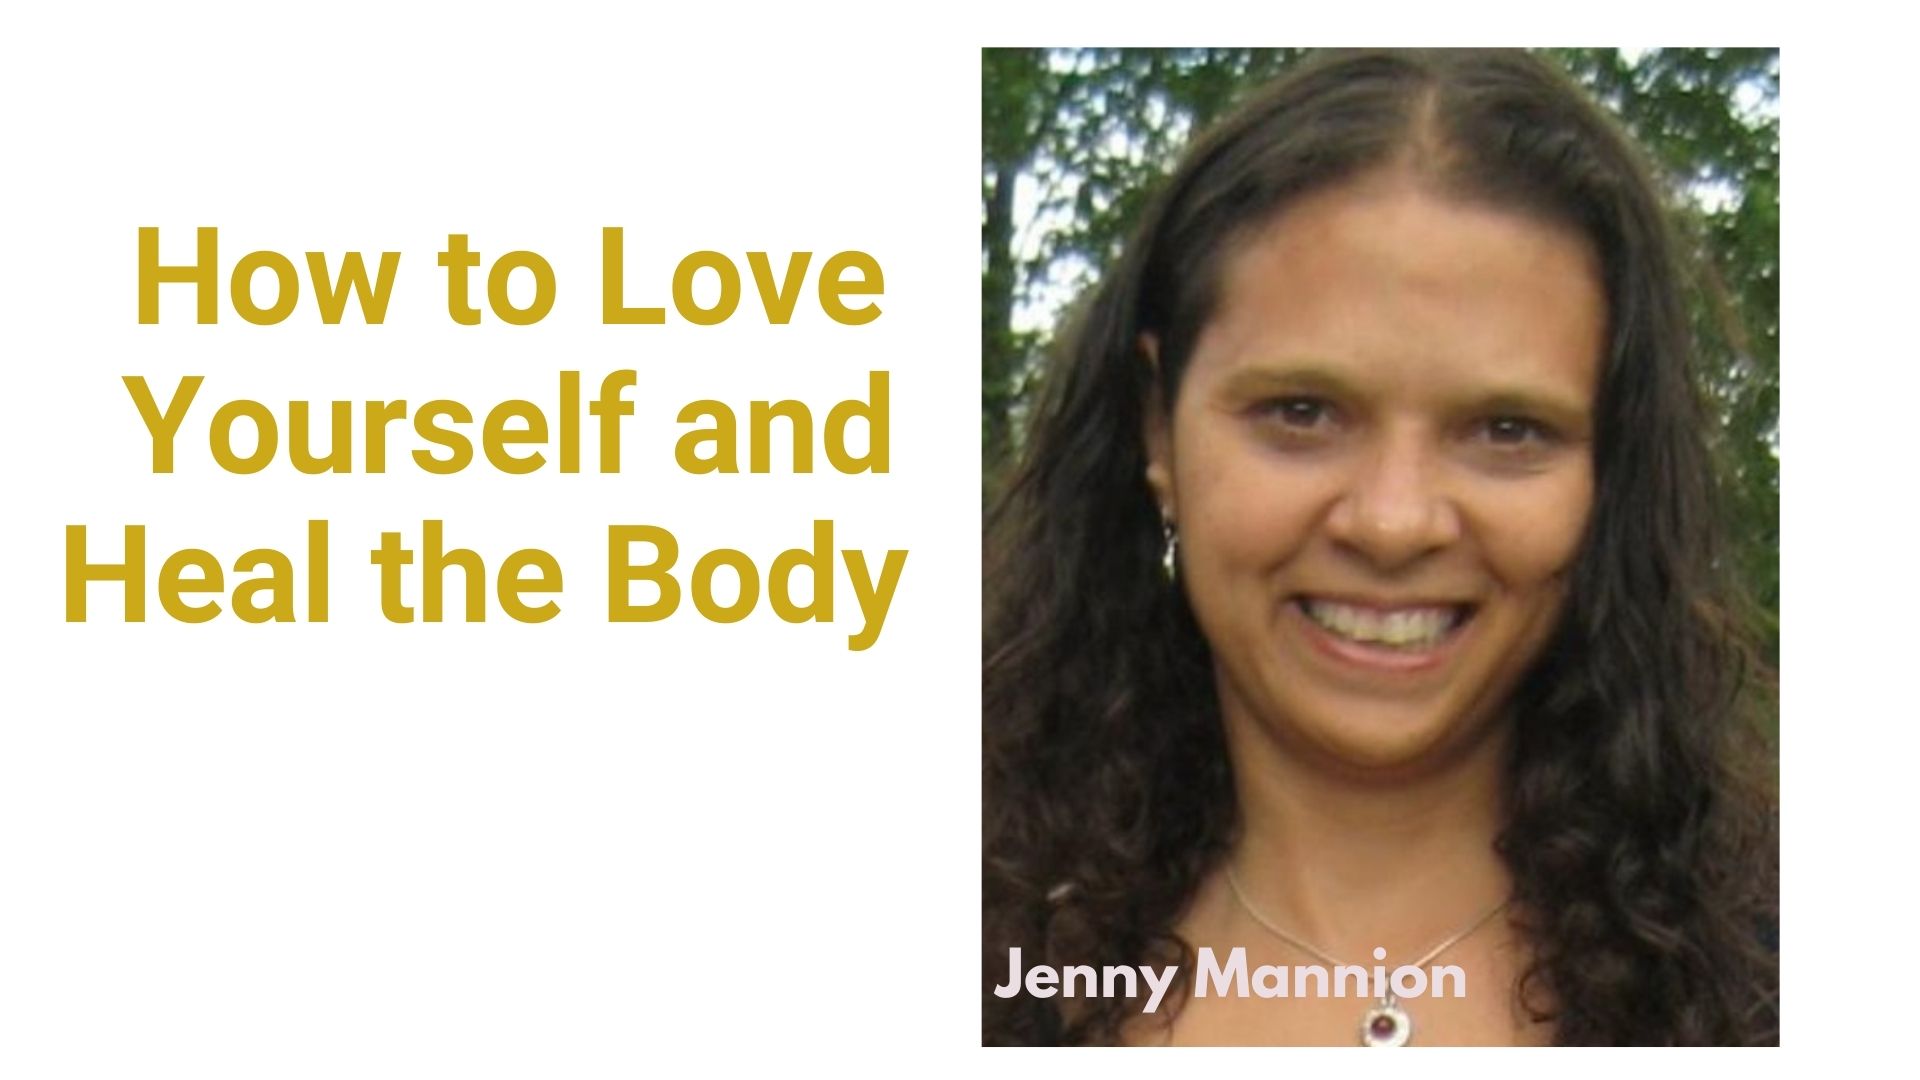 Love Yourself and Heal the Body